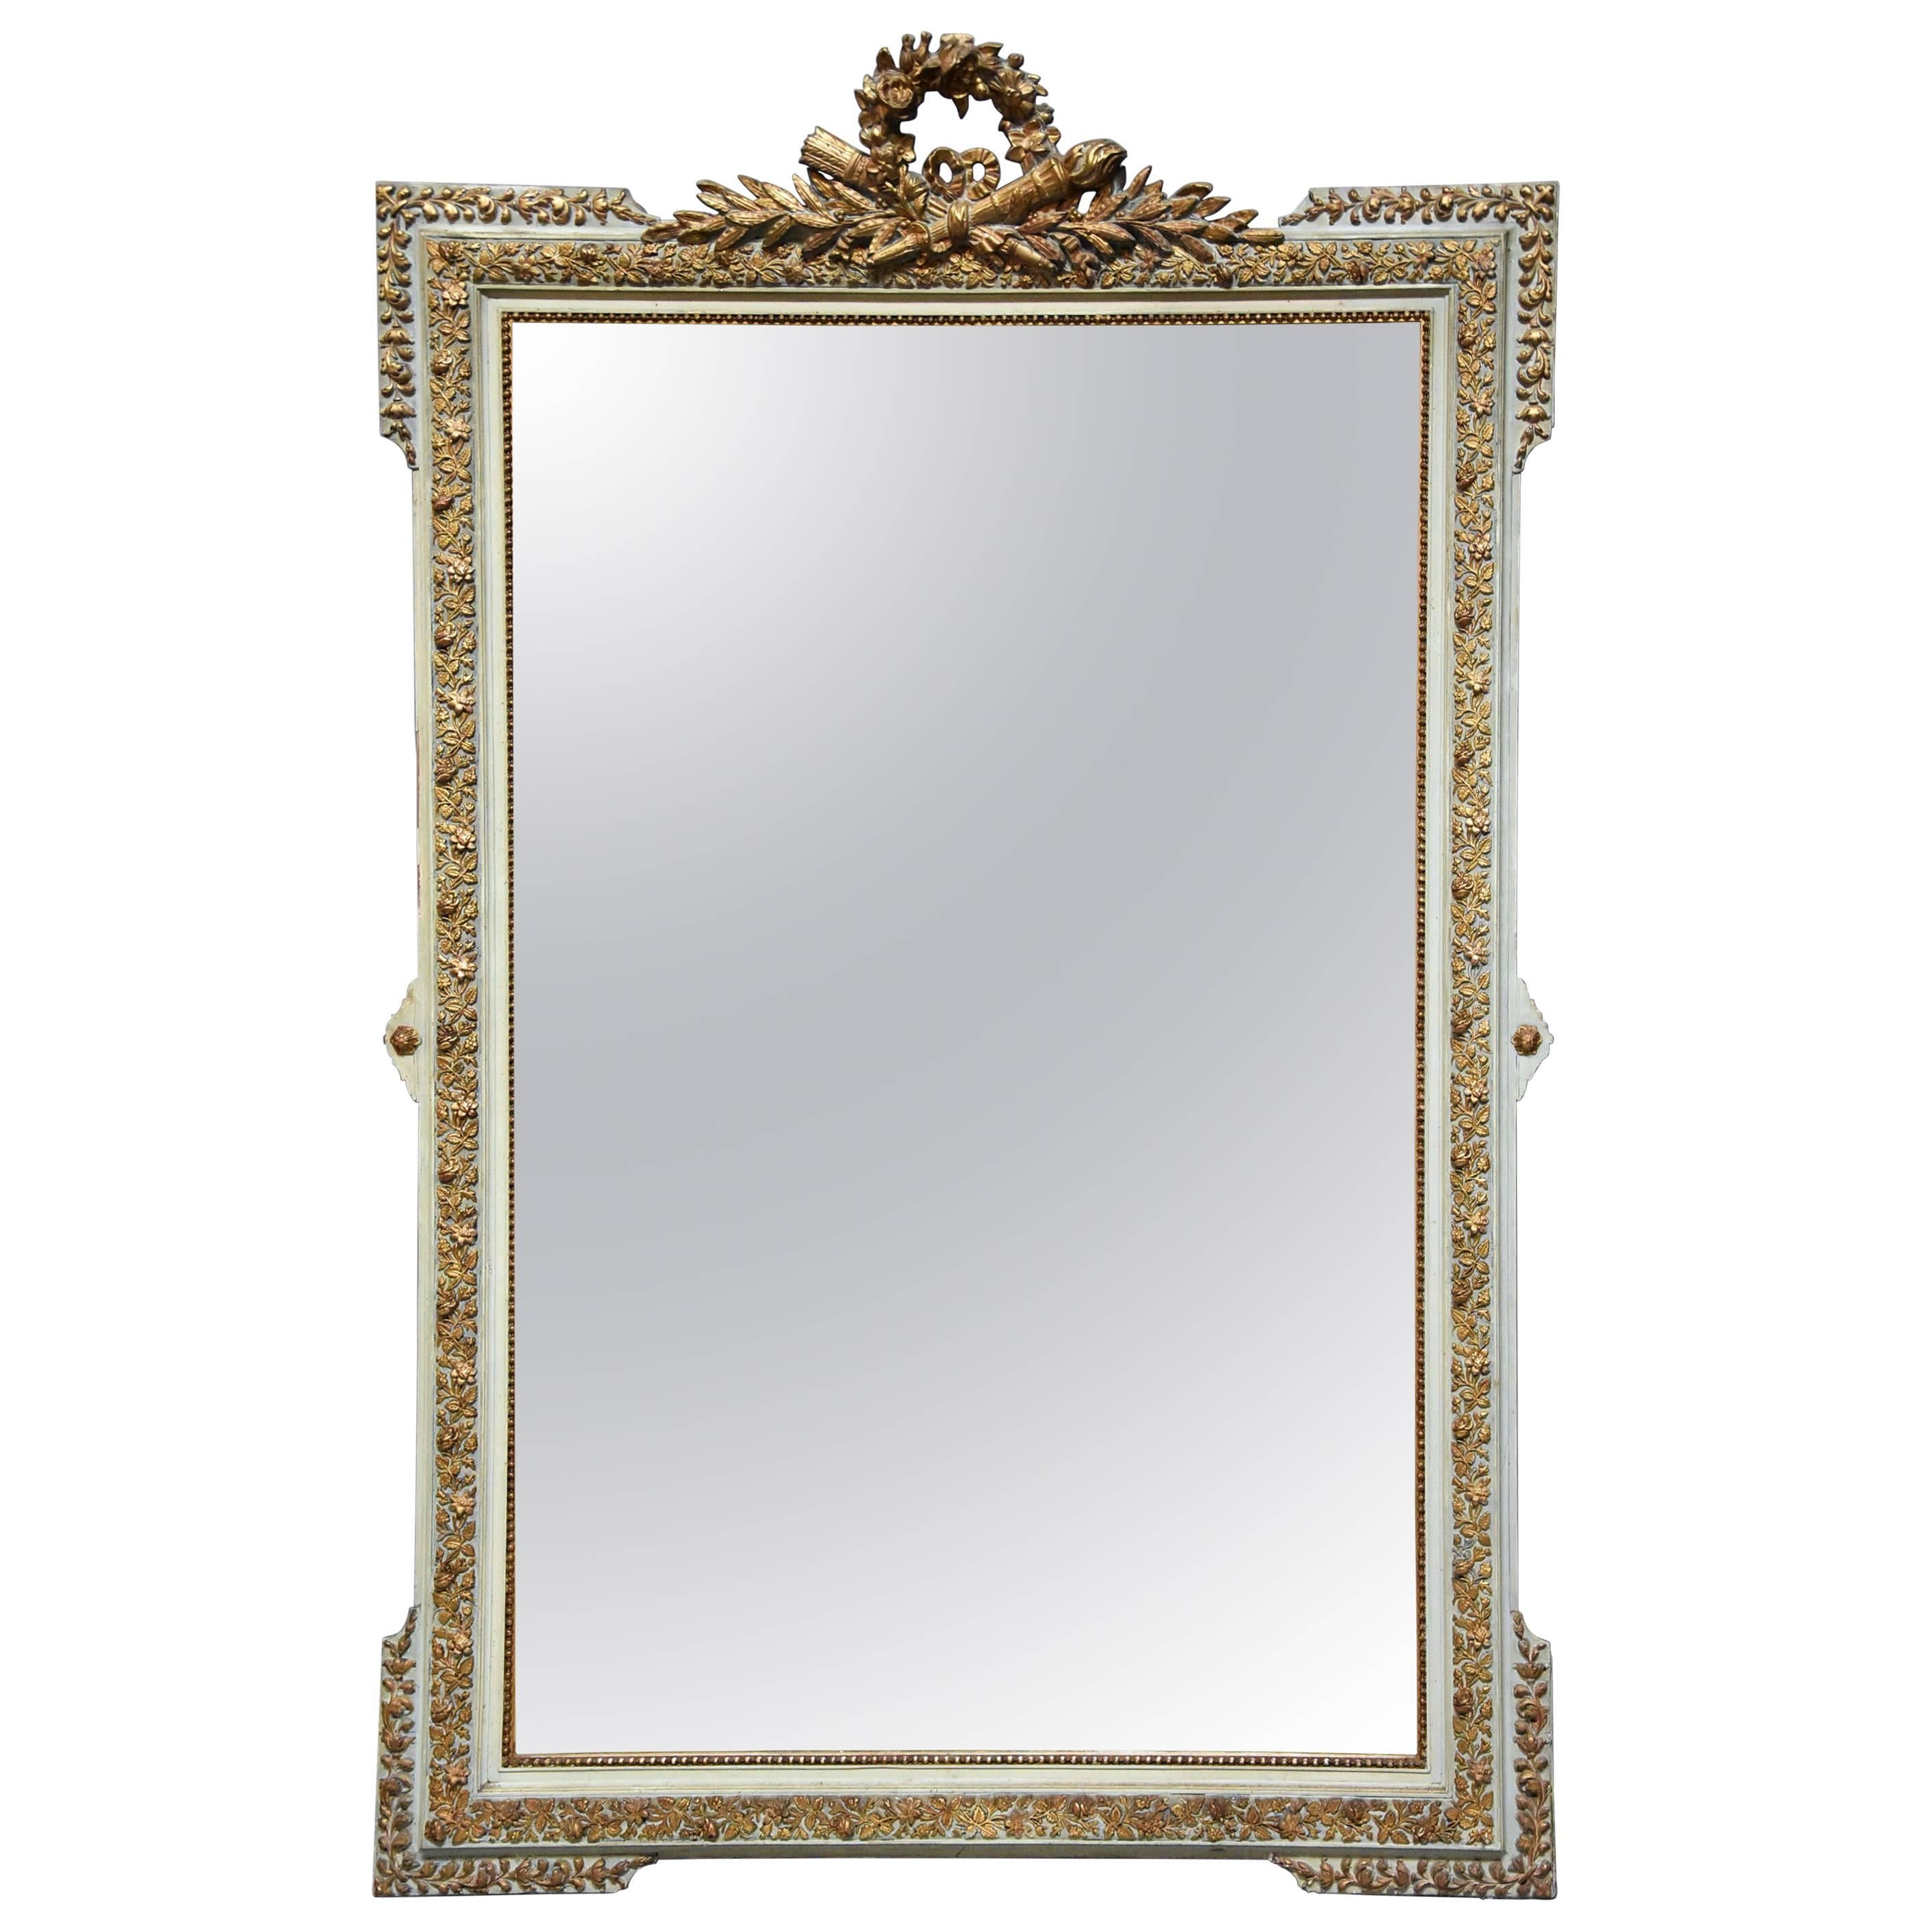 Large Late 19th Century French Gilt and Painted Mirror in the Louis XVI Style